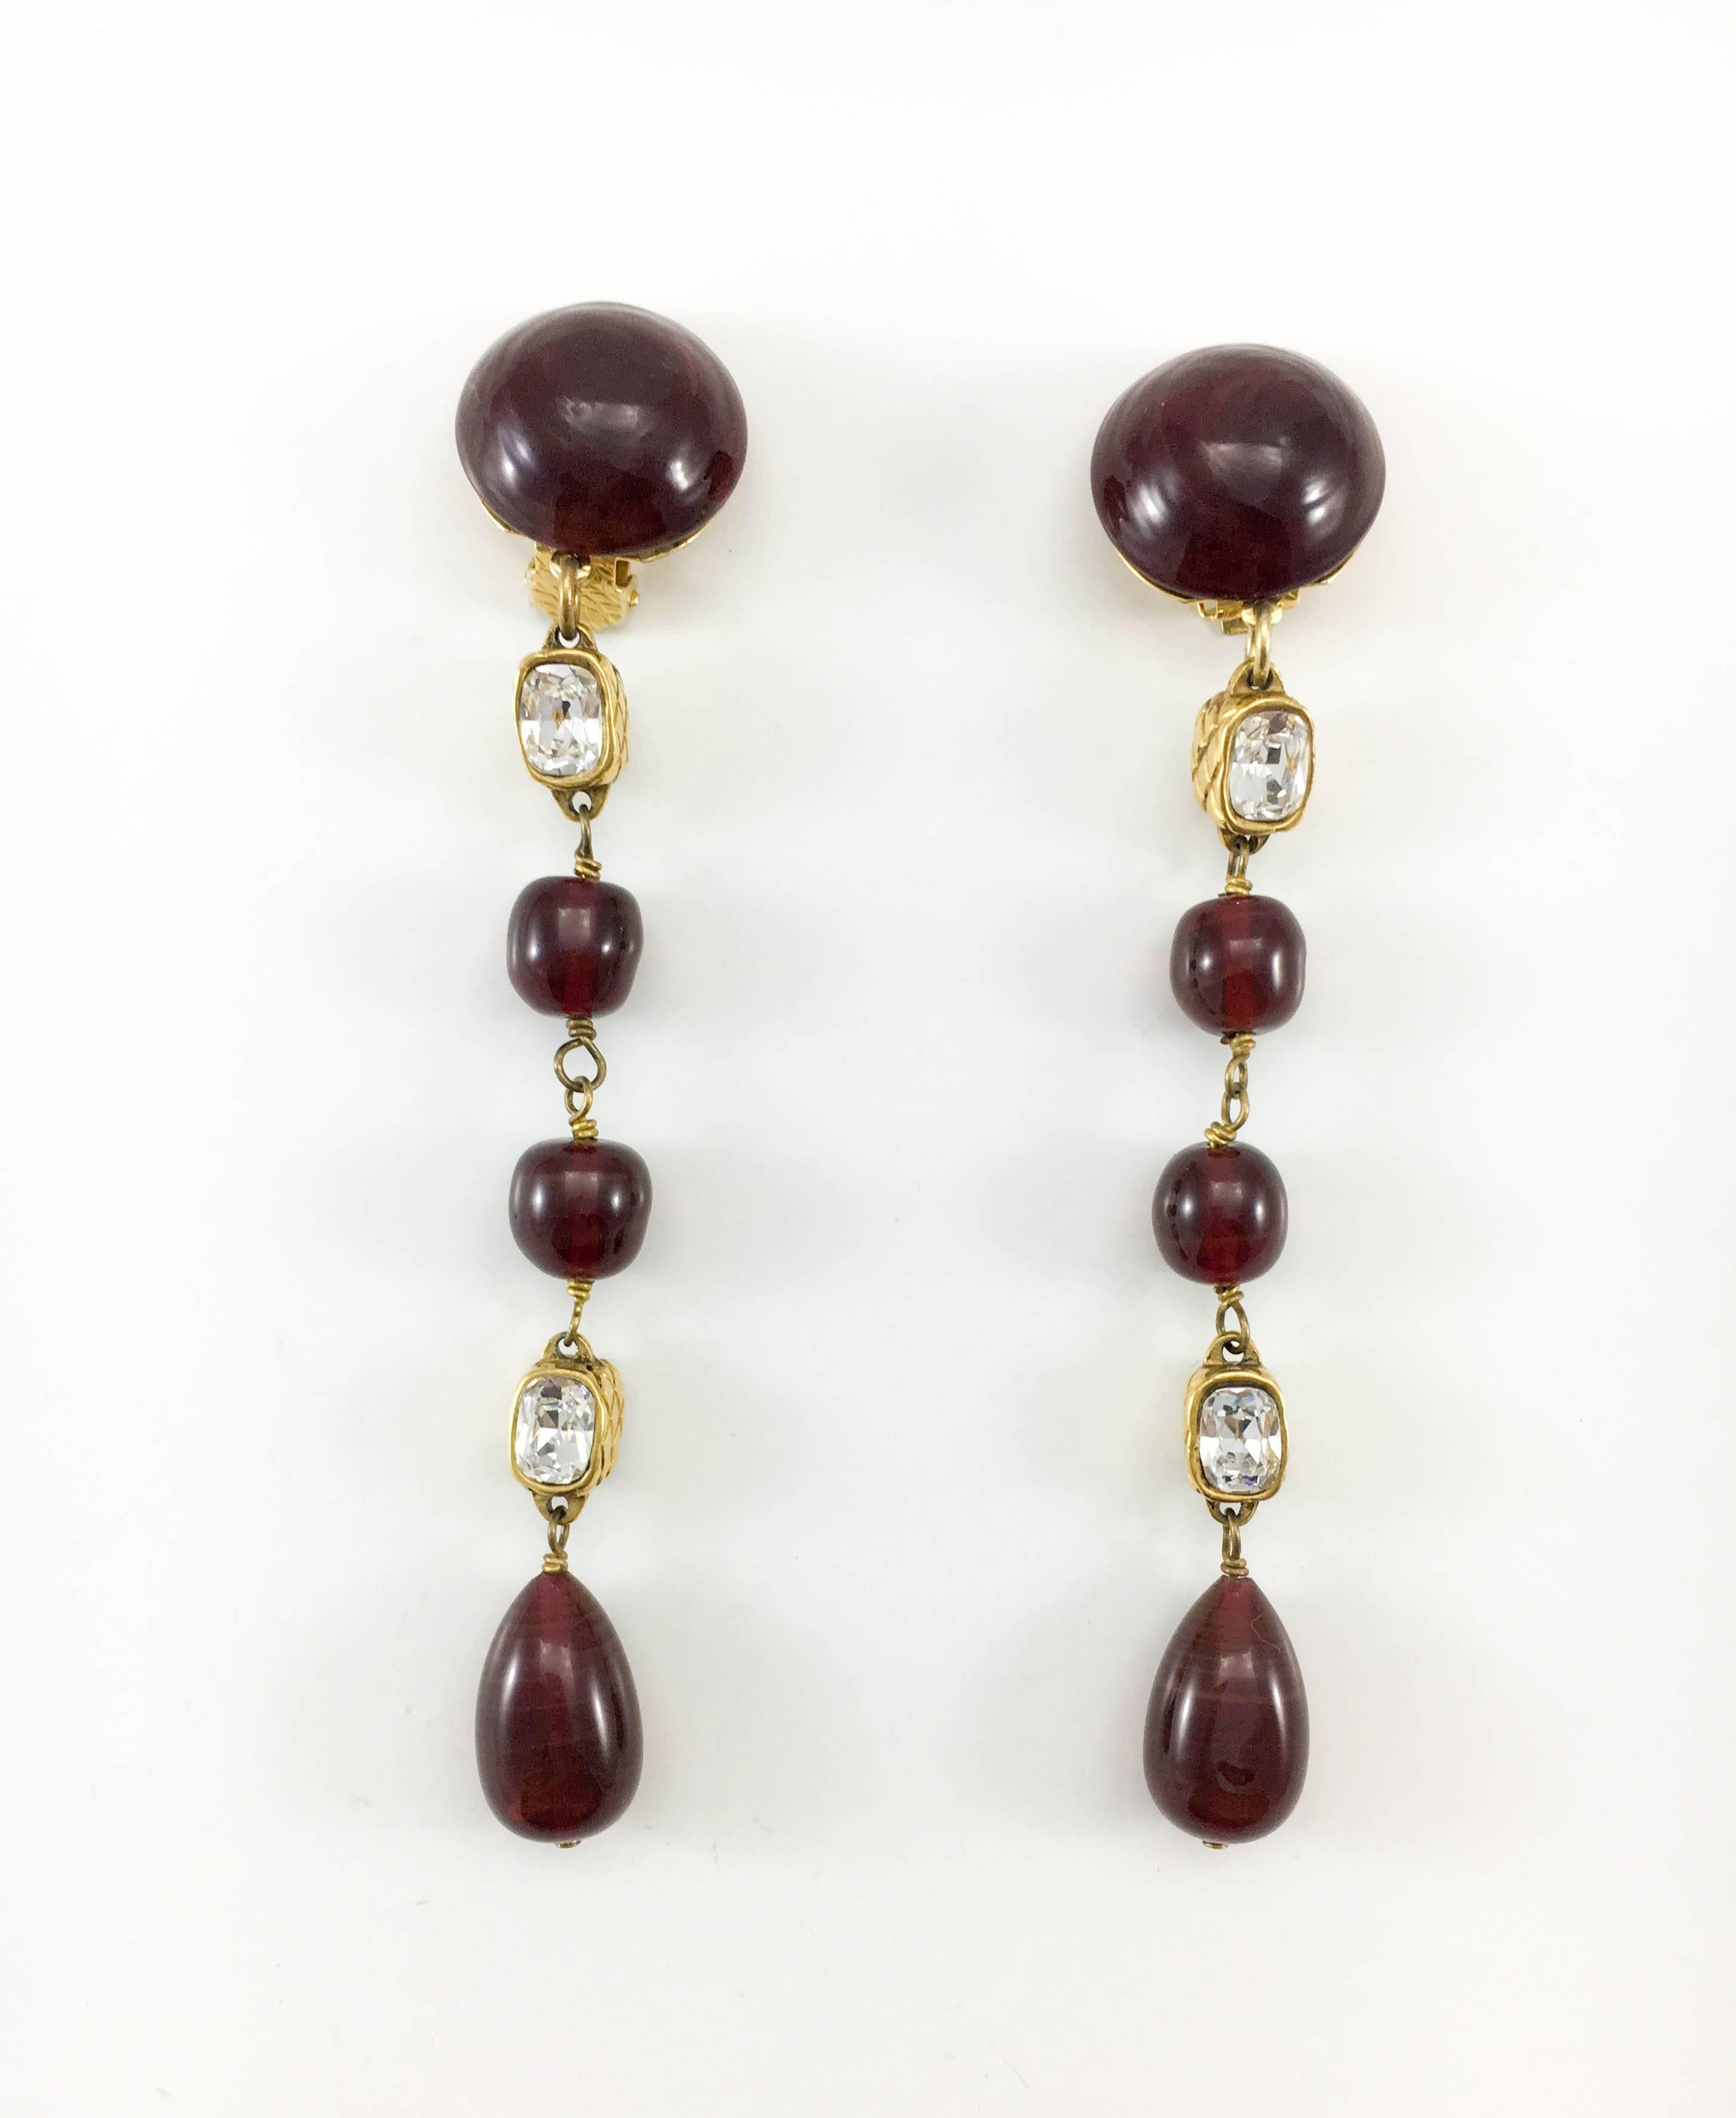 Vintage Chanel Red Gripoix and Crystal Beads Long Clip-On Dangling Earrings. These beautiful earrings were designed by the legendary jewellery designer Victoire de Castellane in 1986, her first year at Chanel. Made in red gripoix beads, rhinestones